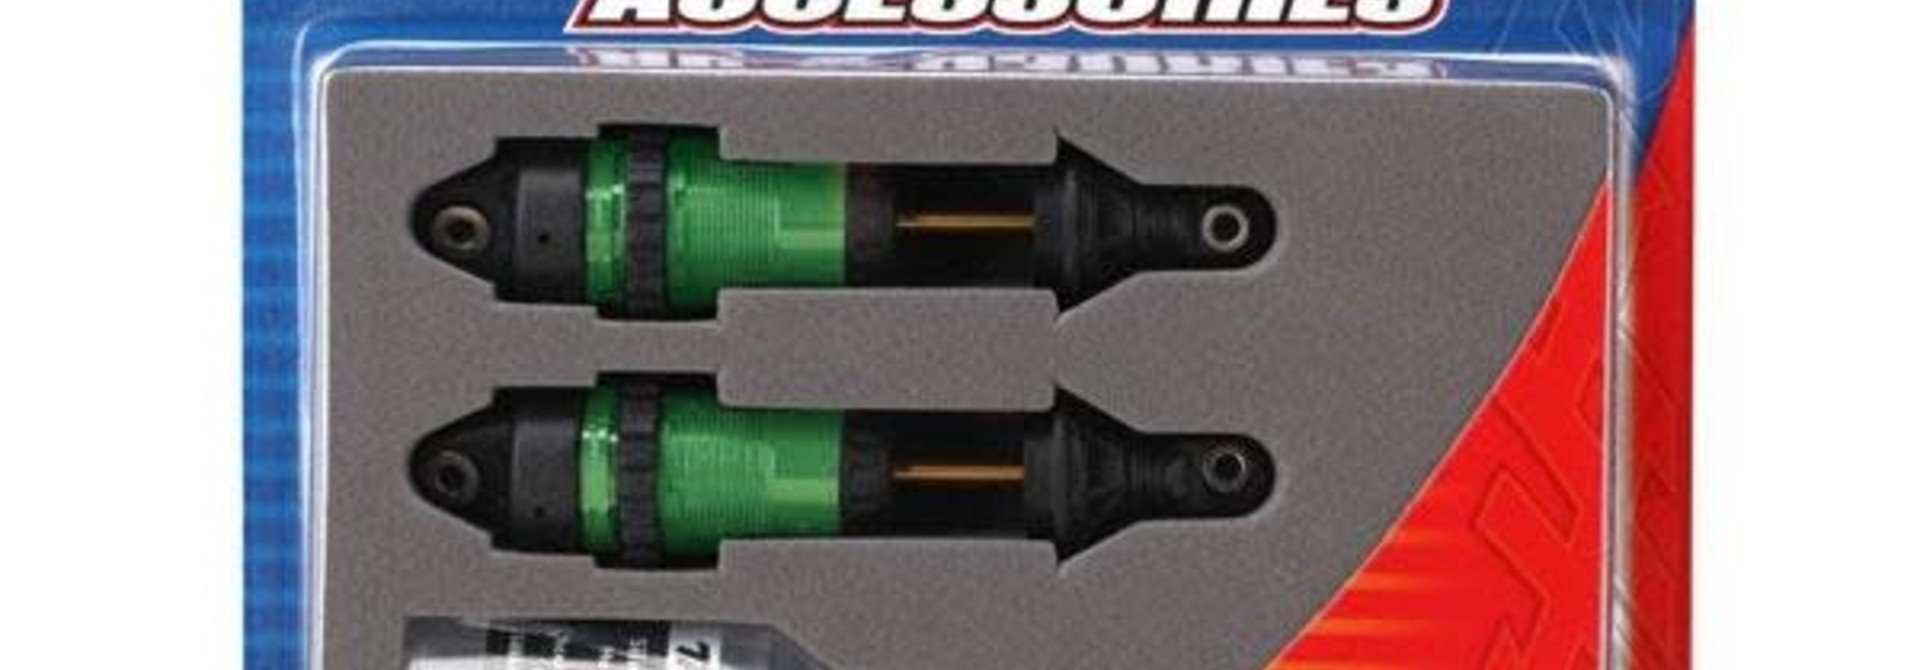 Shocks, GTR long green-anodized,PTFE-coated bodies with TiN shafts (fully assemb